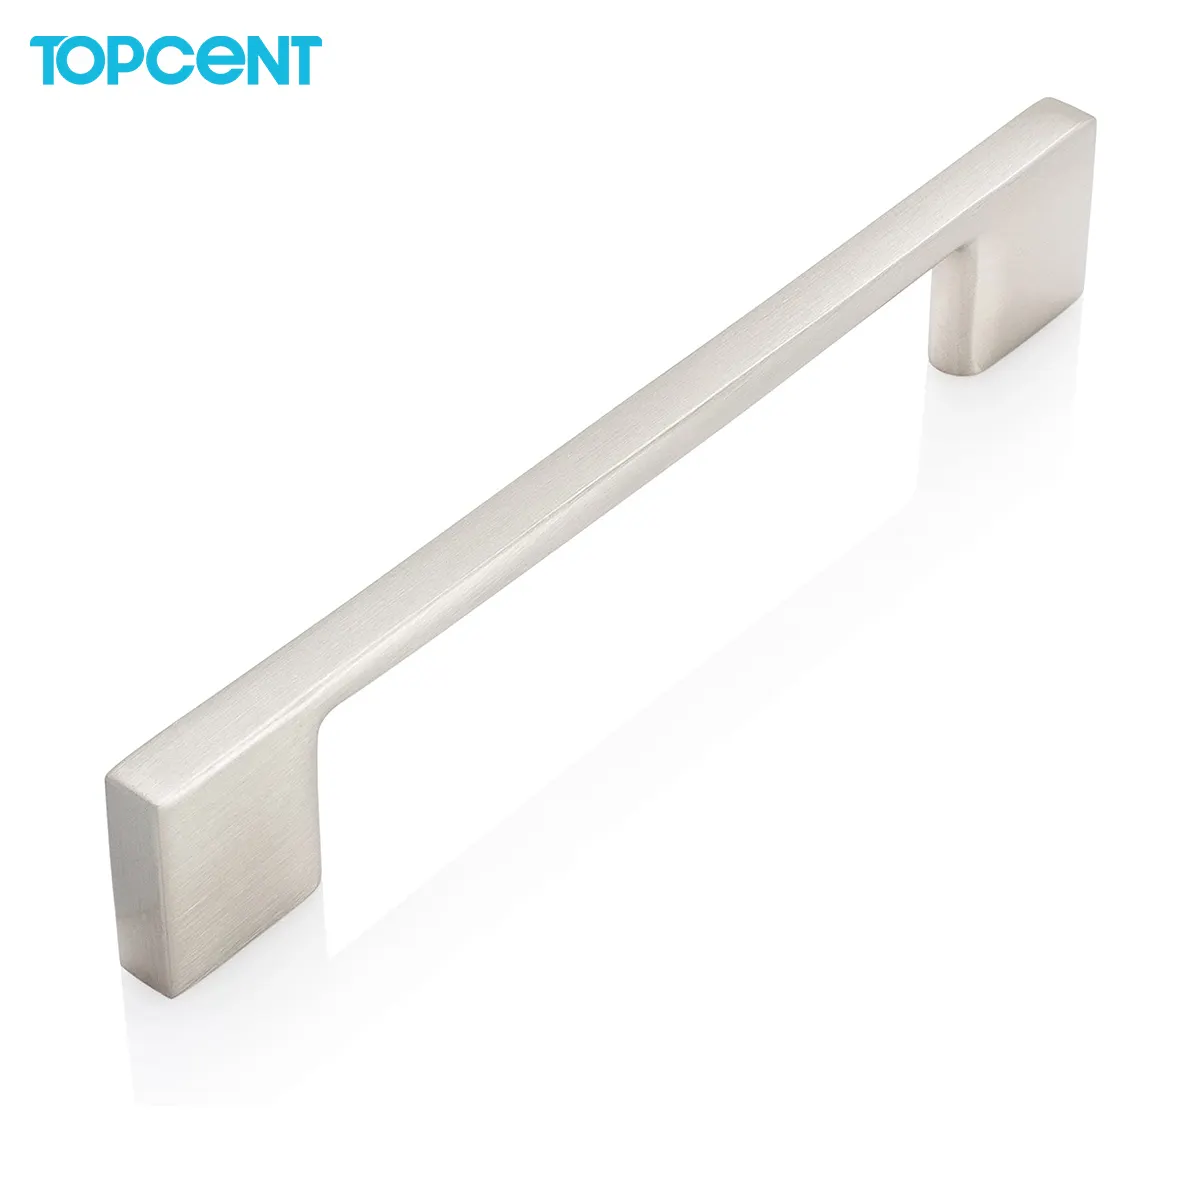 Topcent High Quality Zinc Alloy Cabinet Handles American Style Solid Kitchen Drawer Knobs Cupboard Handle